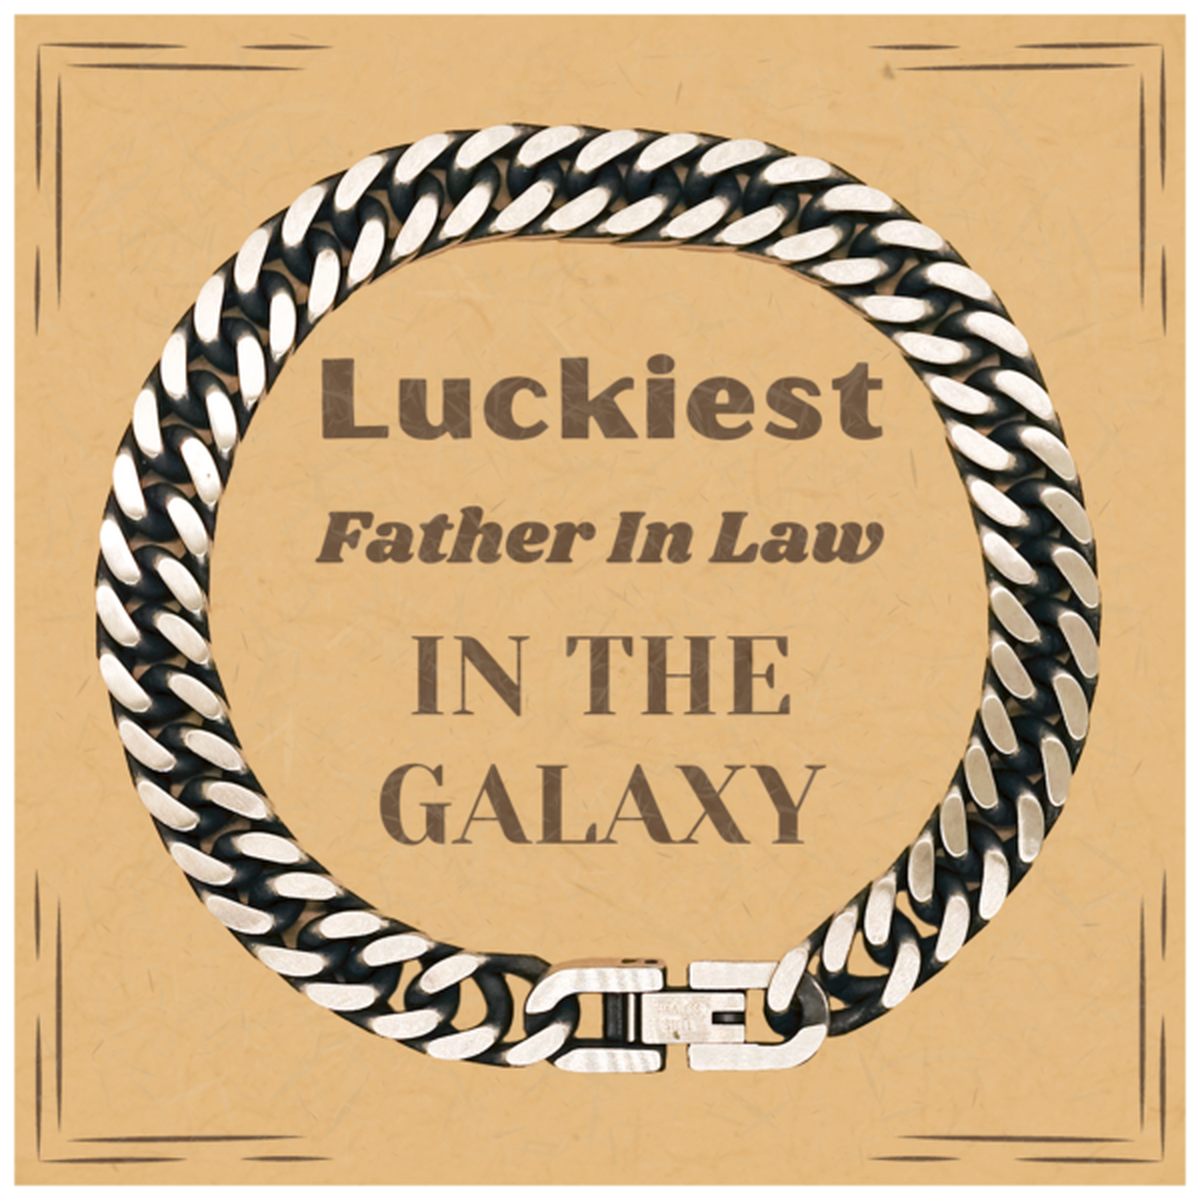 Luckiest Father In Law in the Galaxy, To My Father In Law Message Card Gifts, Christmas Father In Law Cuban Link Chain Bracelet Gifts, X-mas Birthday Unique Gifts For Father In Law Men Women